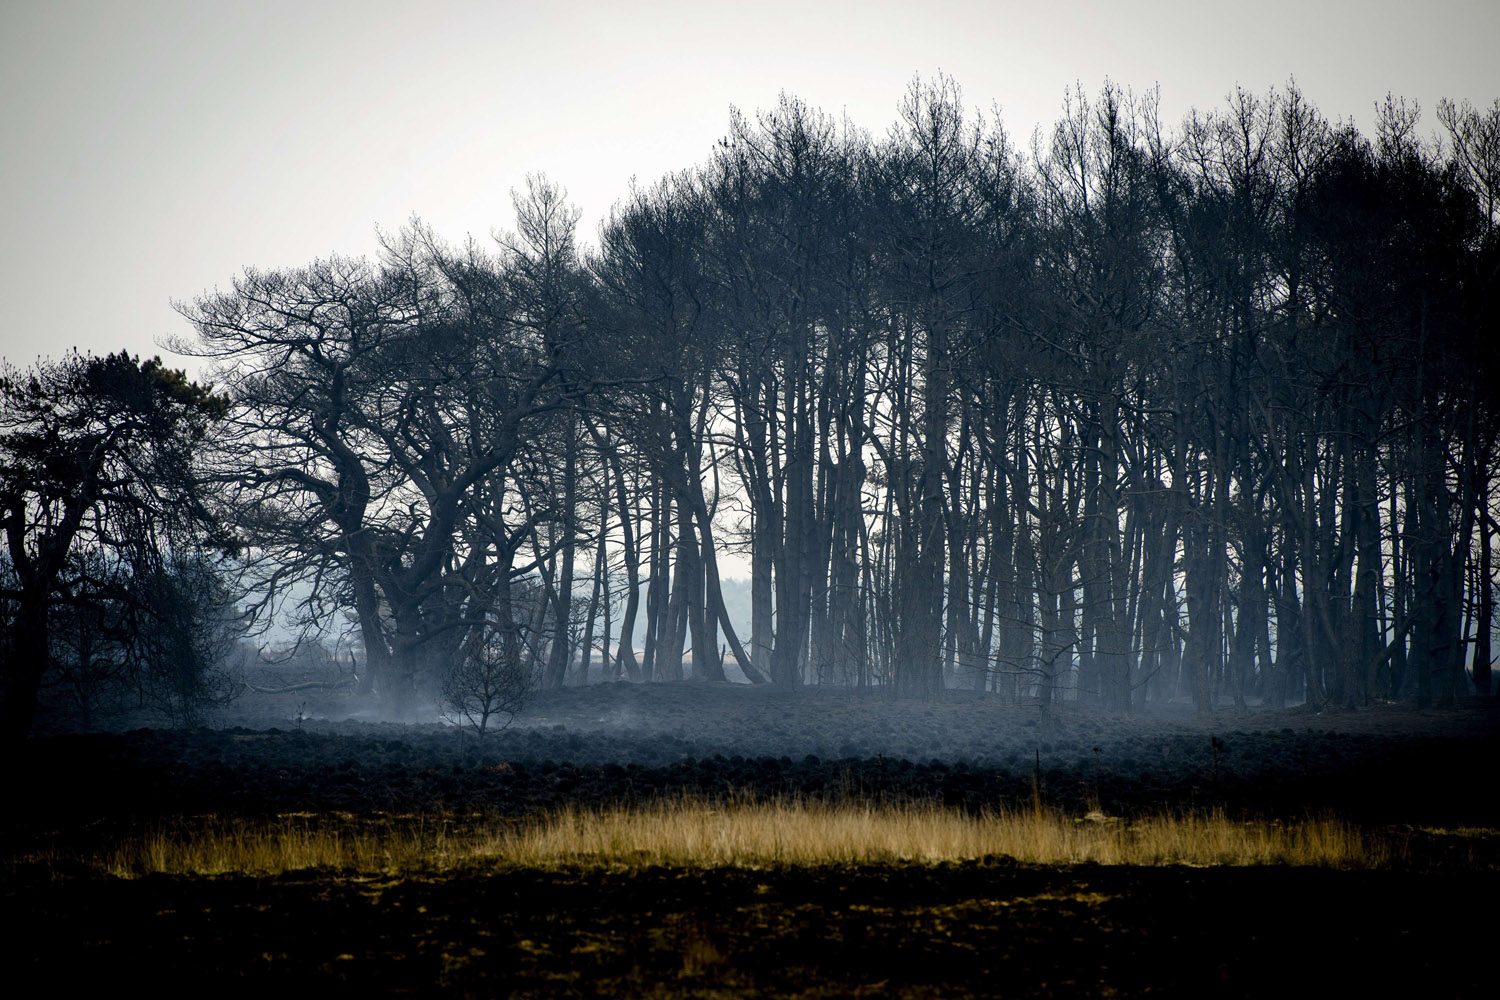 Apr. 21, 2014. A burnt section of the Netherlands' Hoge Veluwe National Park near Hoenderloo on  a day after a large wildfire destroyed more than 300 hectares.